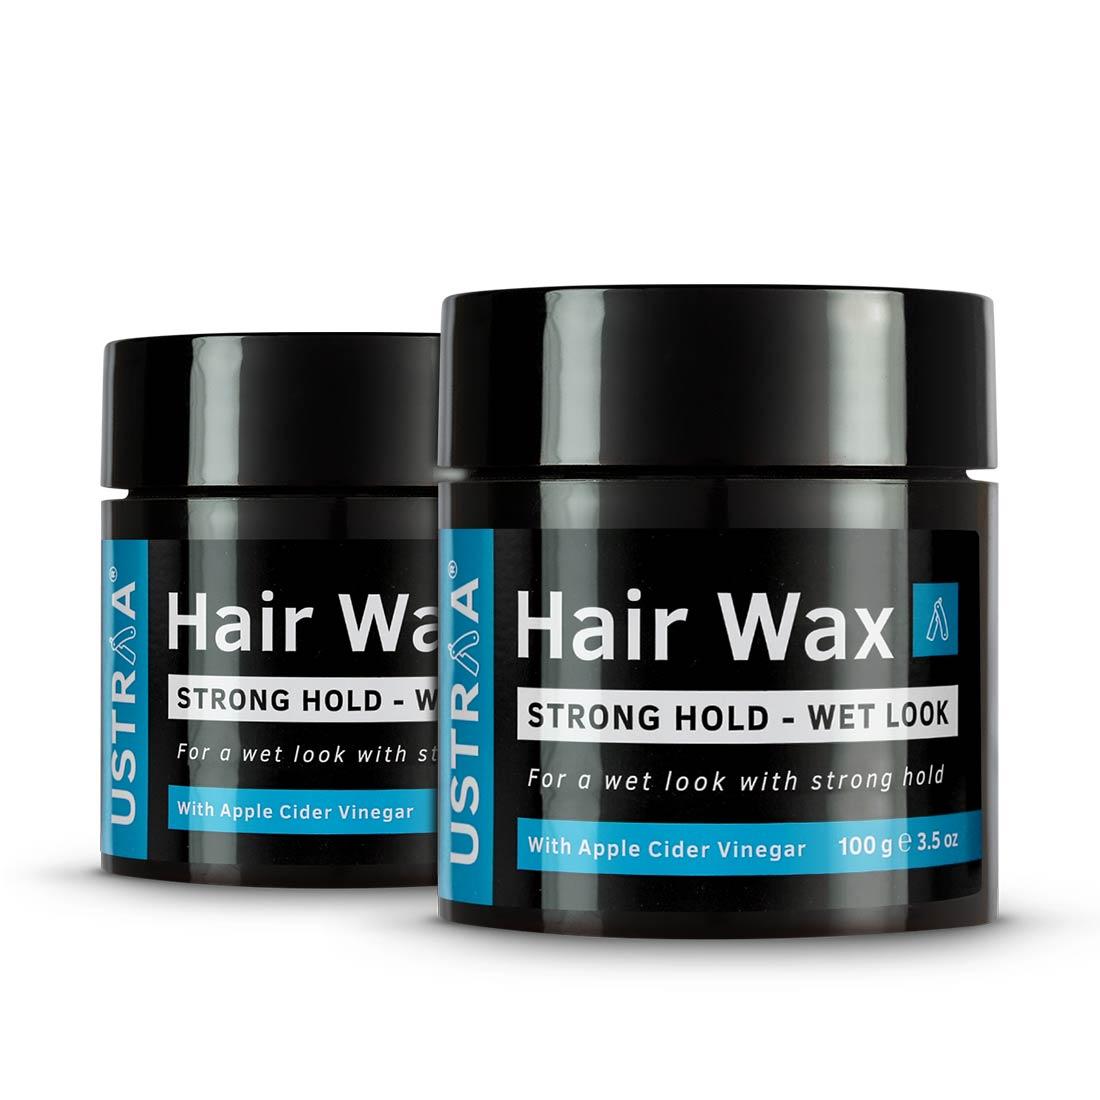 Hair Wax - Strong Hold, Wet Look - 100g (Set of 2)